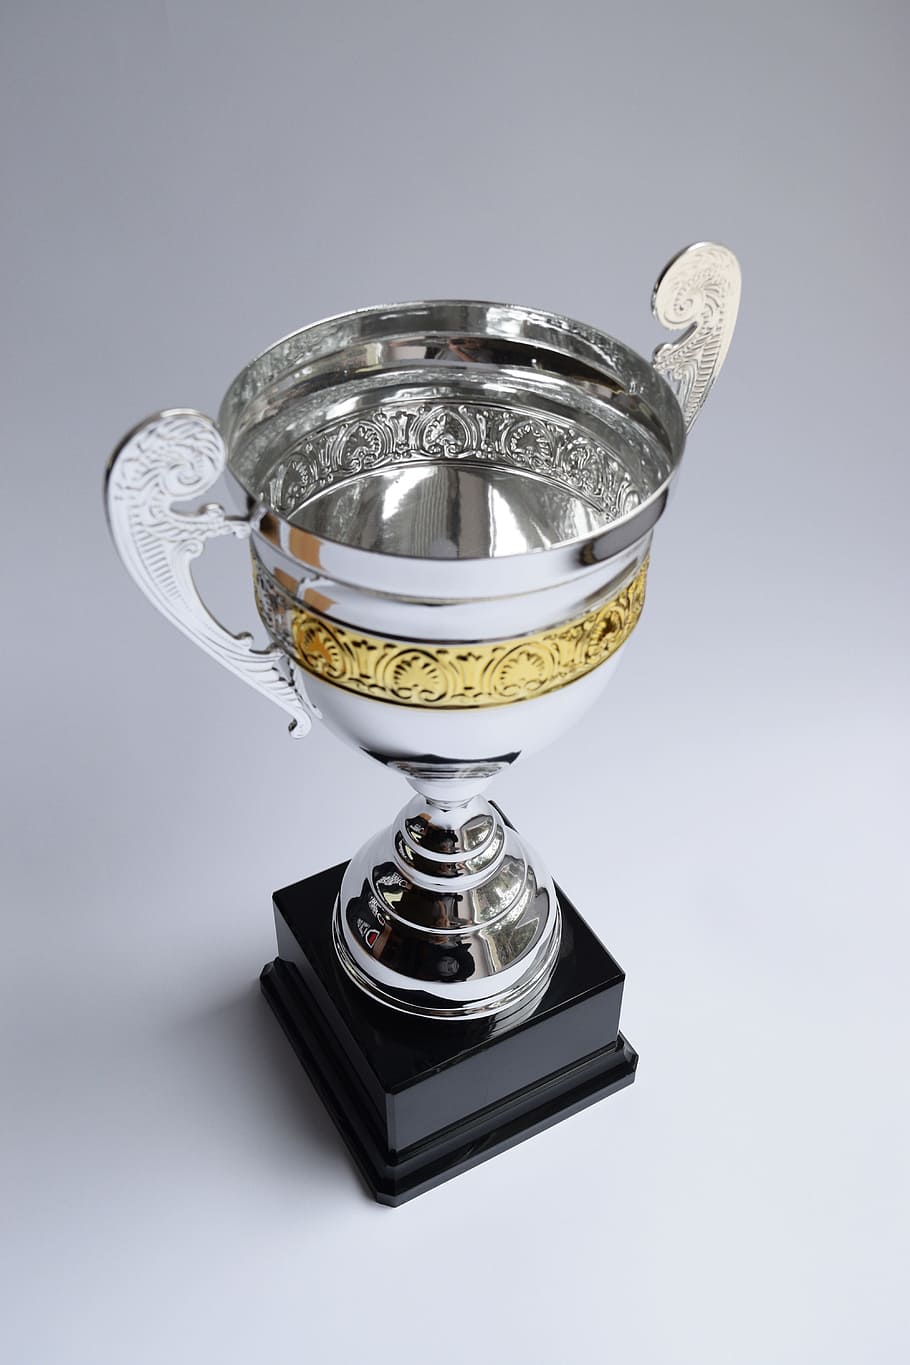 two-tone trophy, trophy, award, winner, prize, cup, victory, achievement, gold, goblet